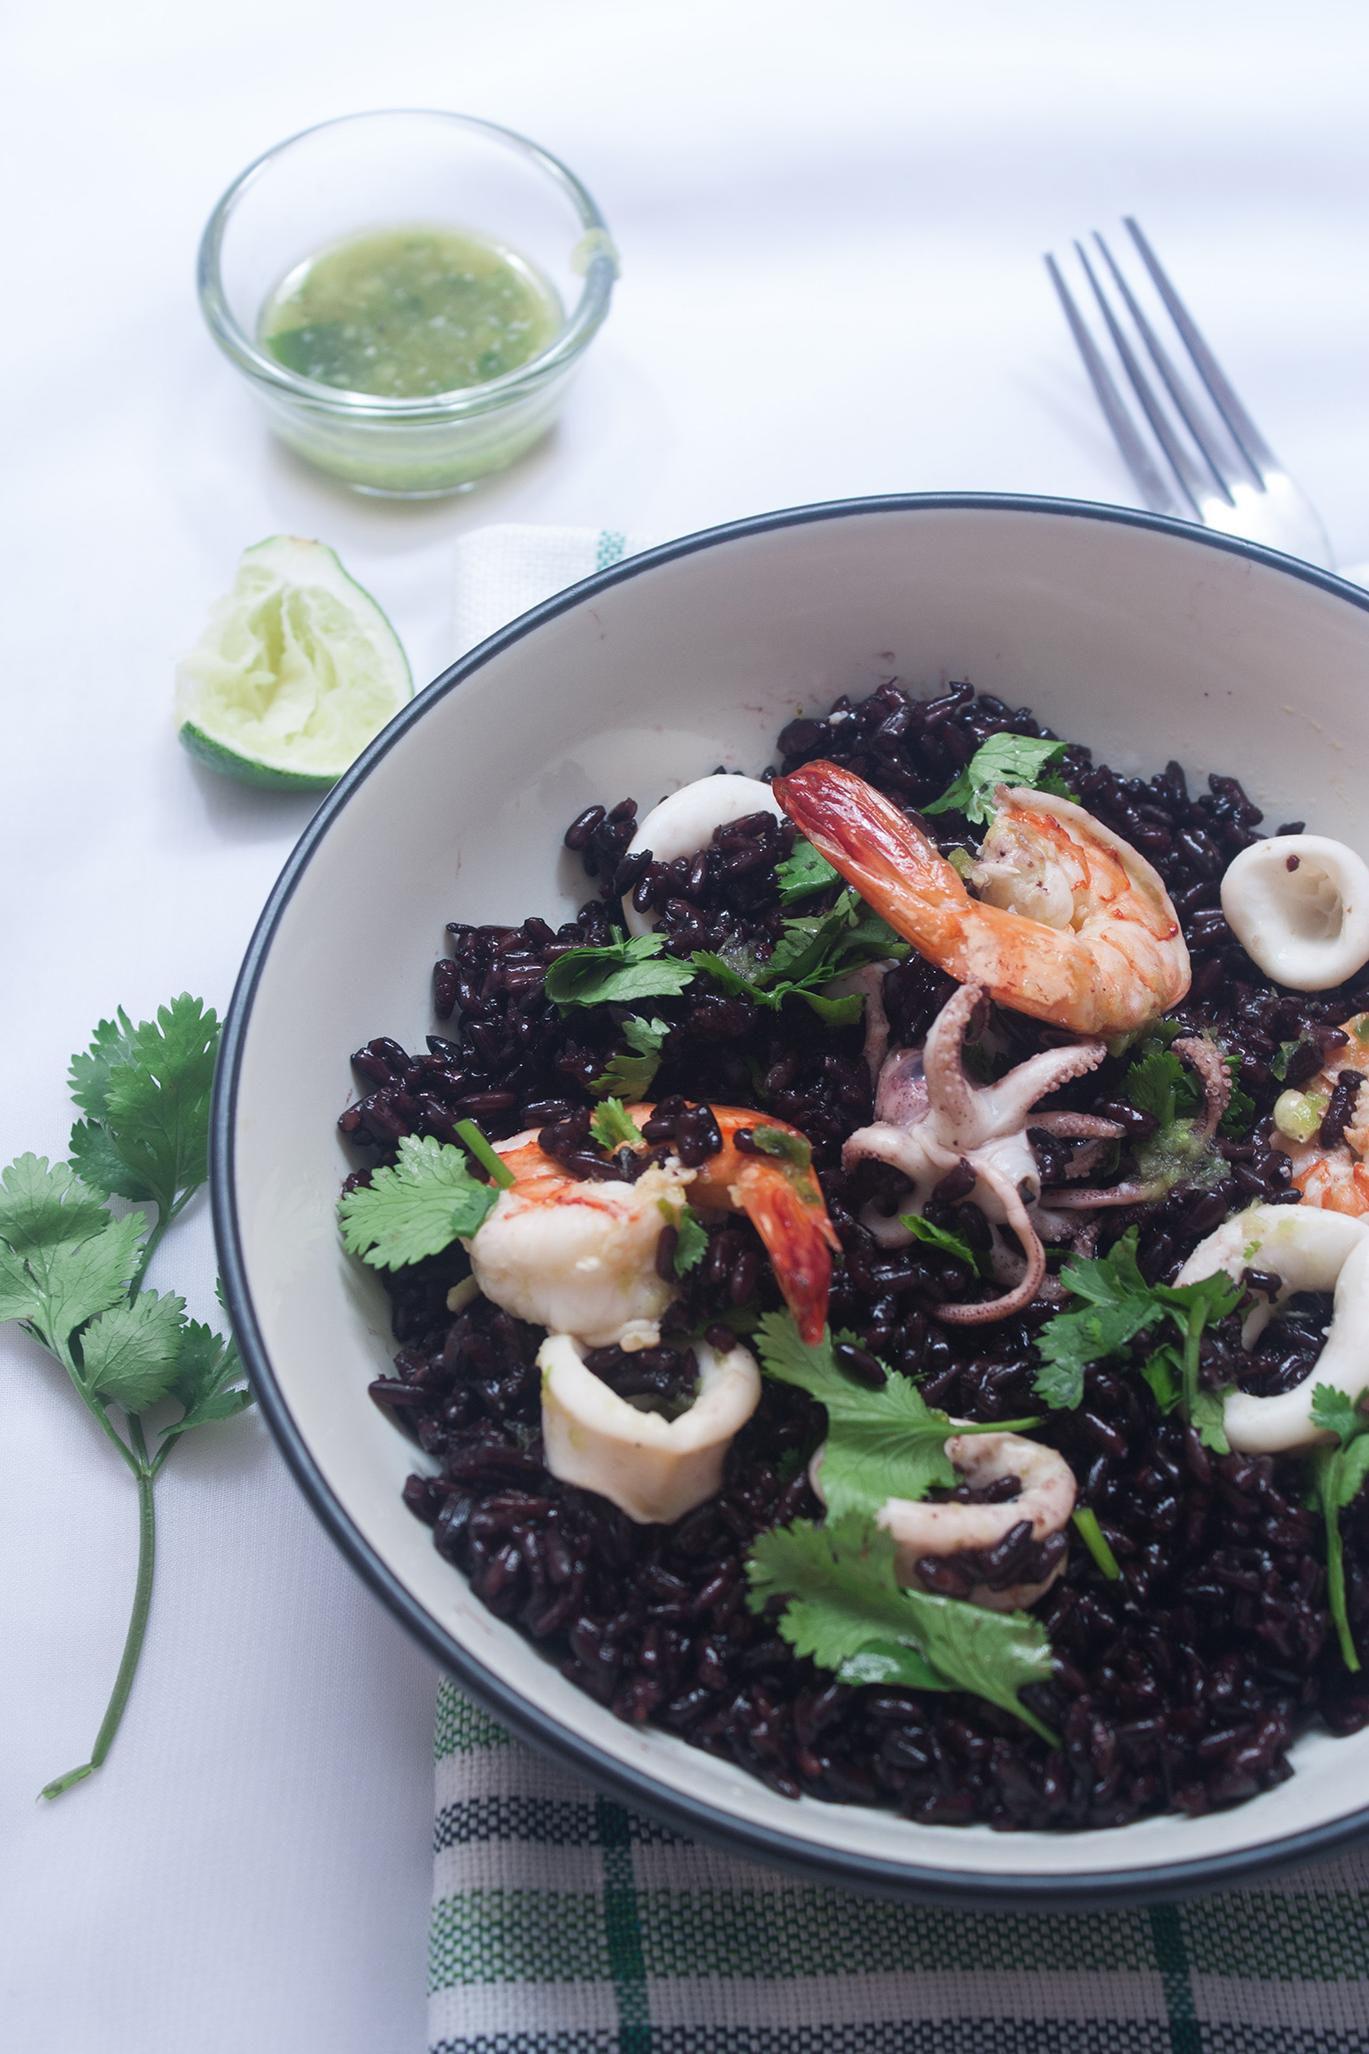  Black rice adds an interesting texture and nutty flavor to the dish.